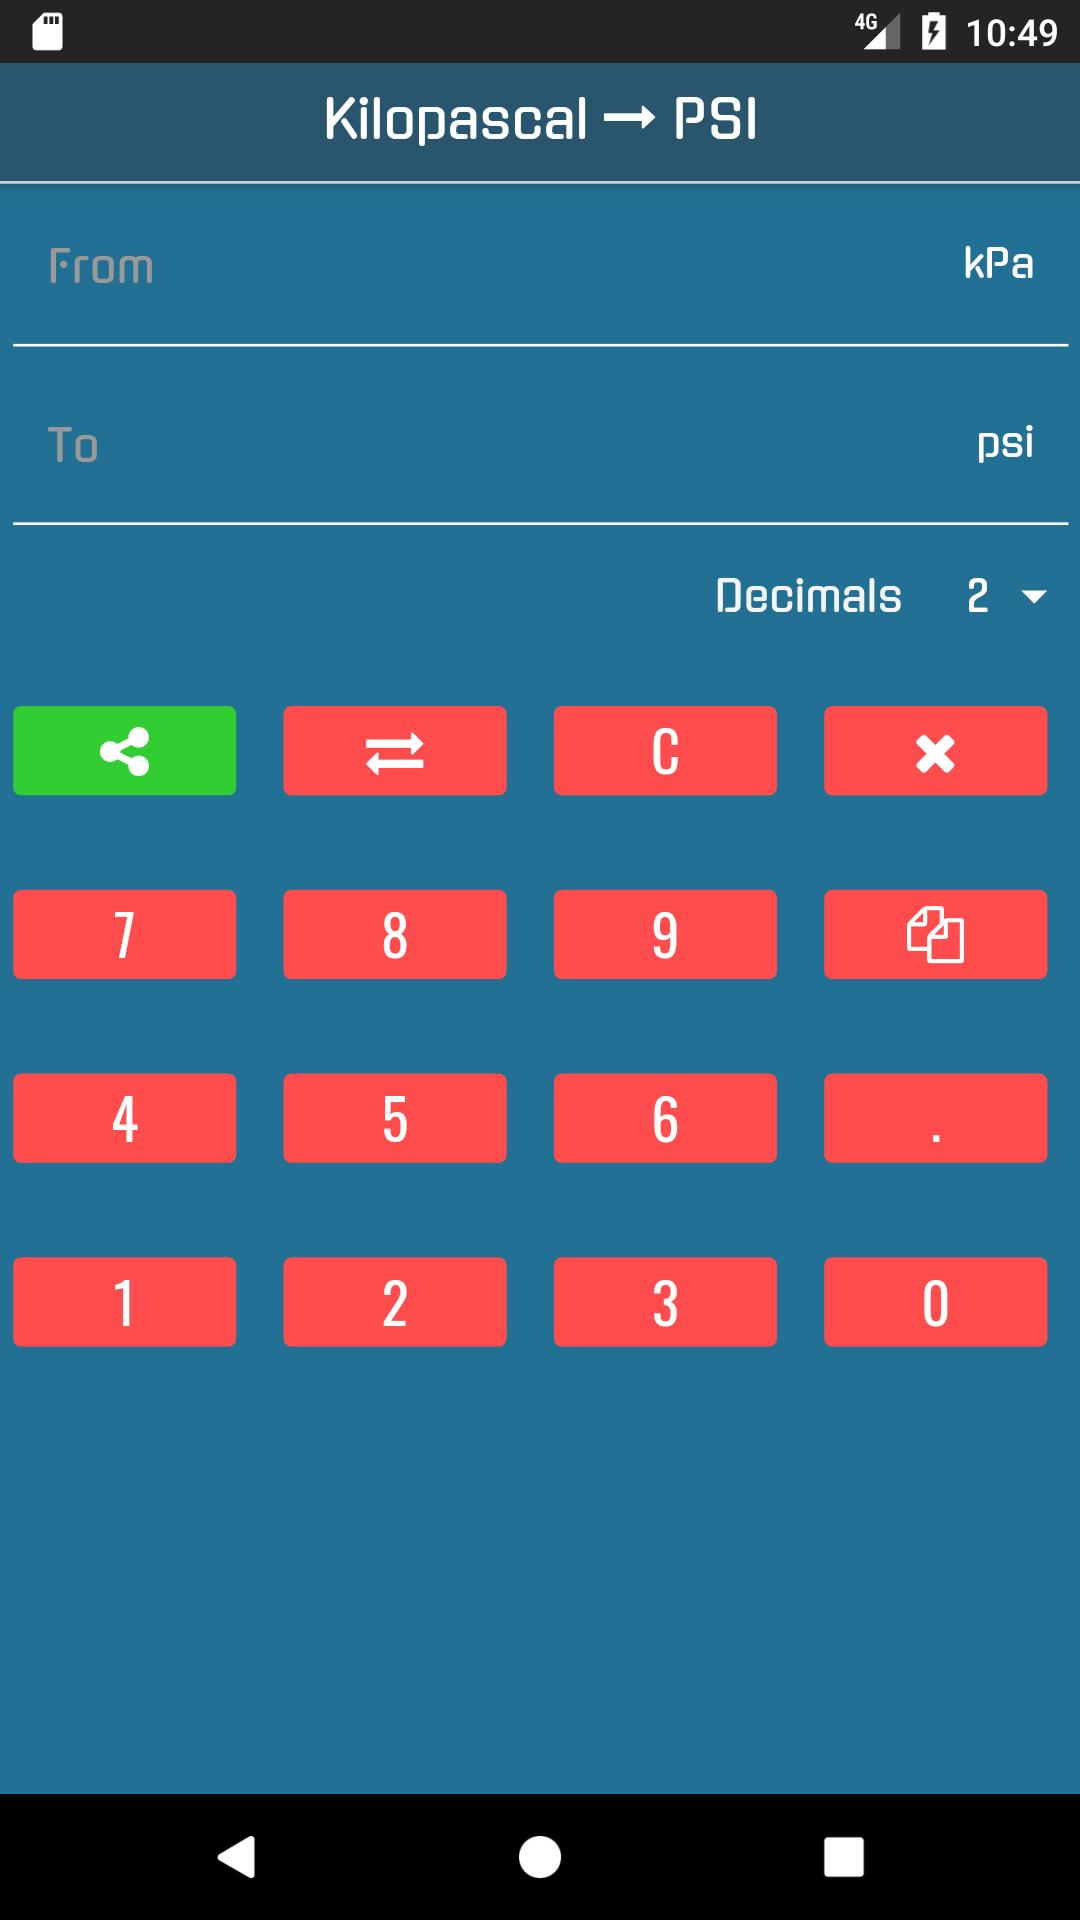 Kpa to Psi Converter for Android - APK Download